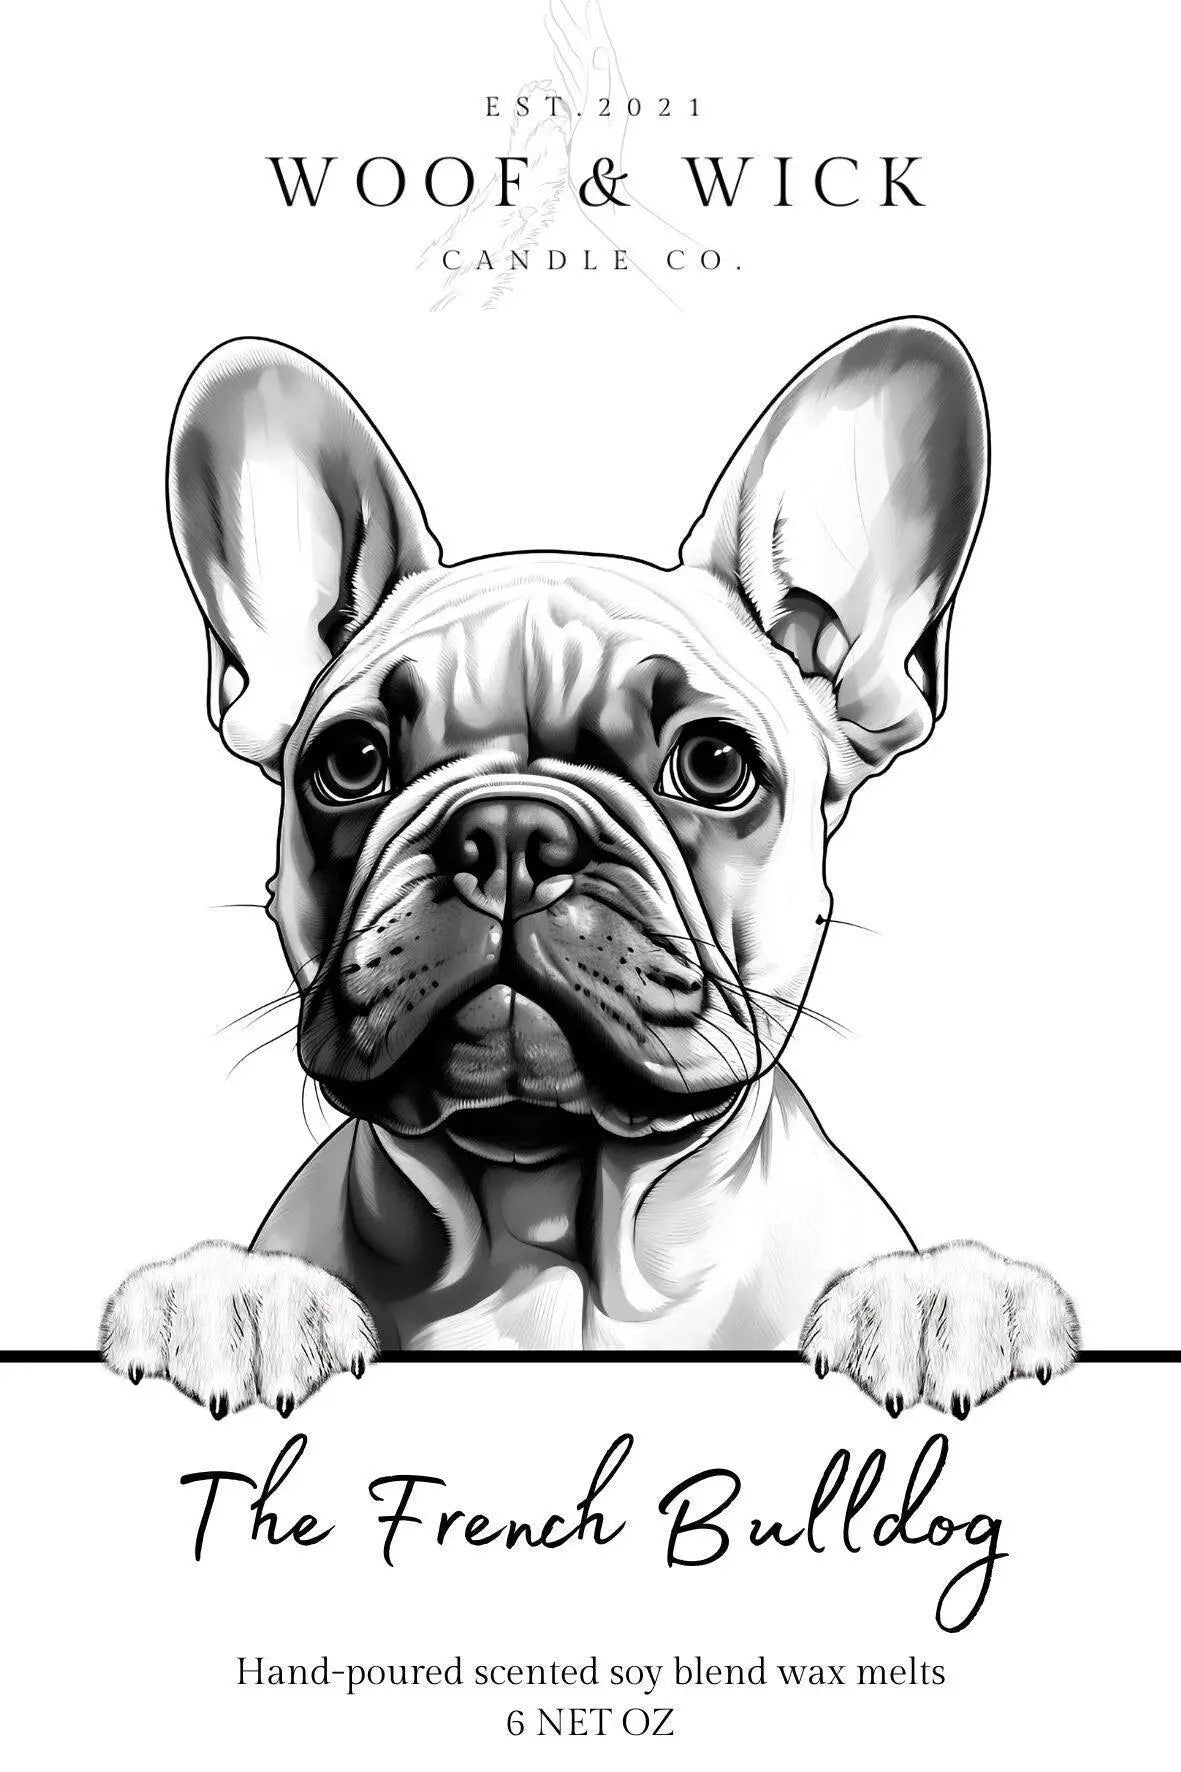 The French Bulldog - STRONG SCENTED Personalized Dog Breed Soy Wax Melts | Gift Ideas | Spring Scents | Wax Tarts | spring wax melts | - Woof & Wick Candle Co.